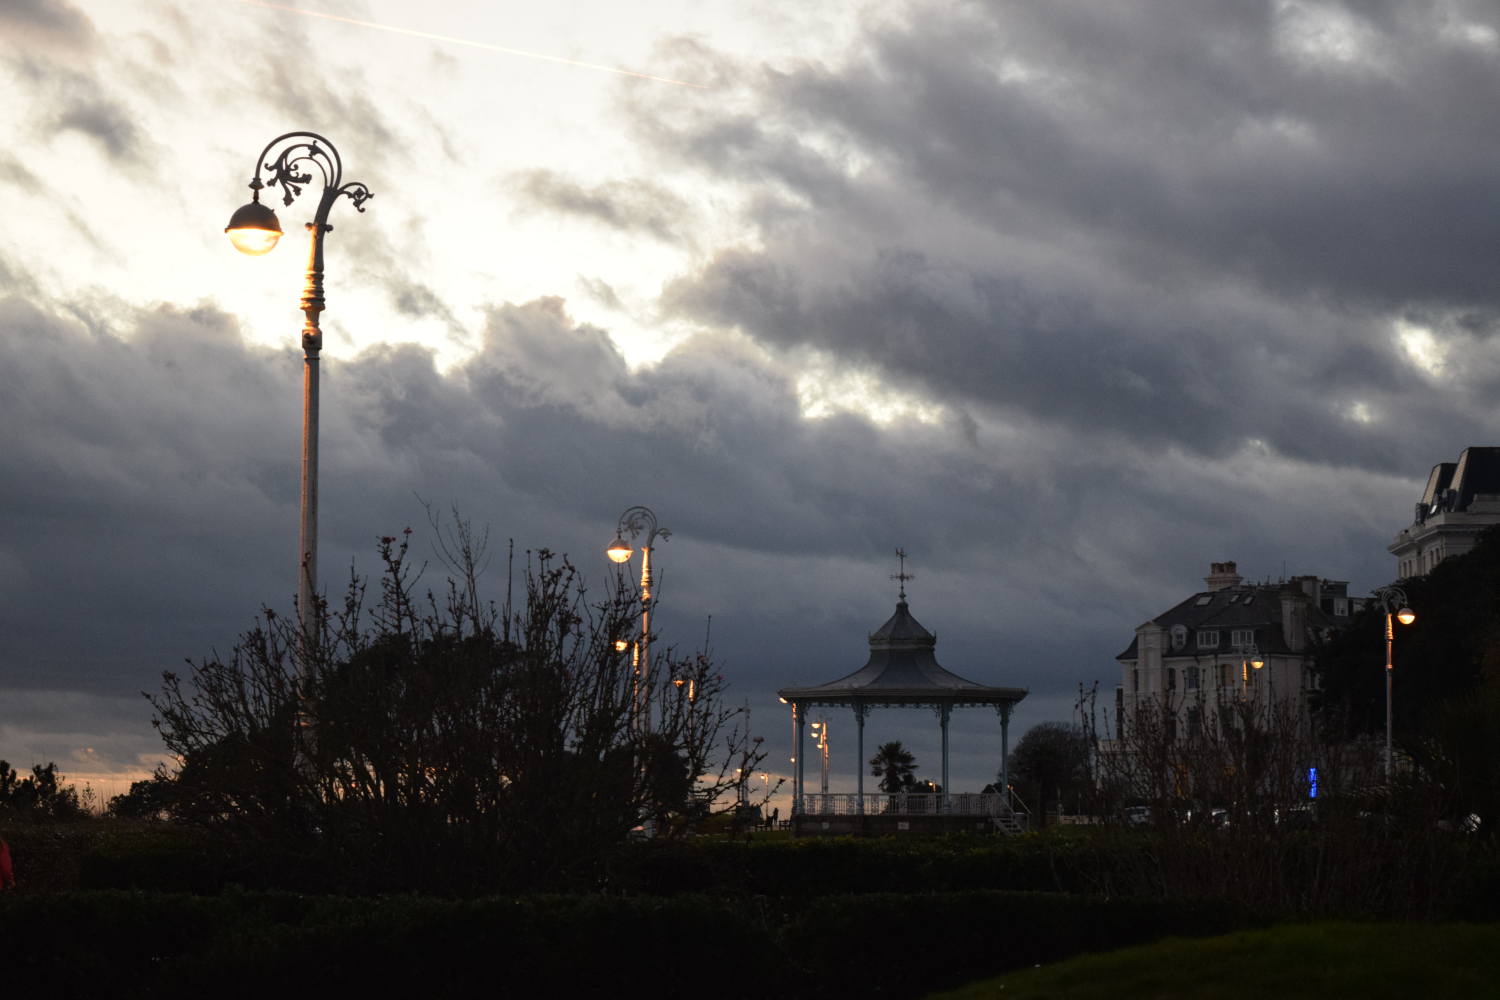 Leas with Bandstand and lamps on